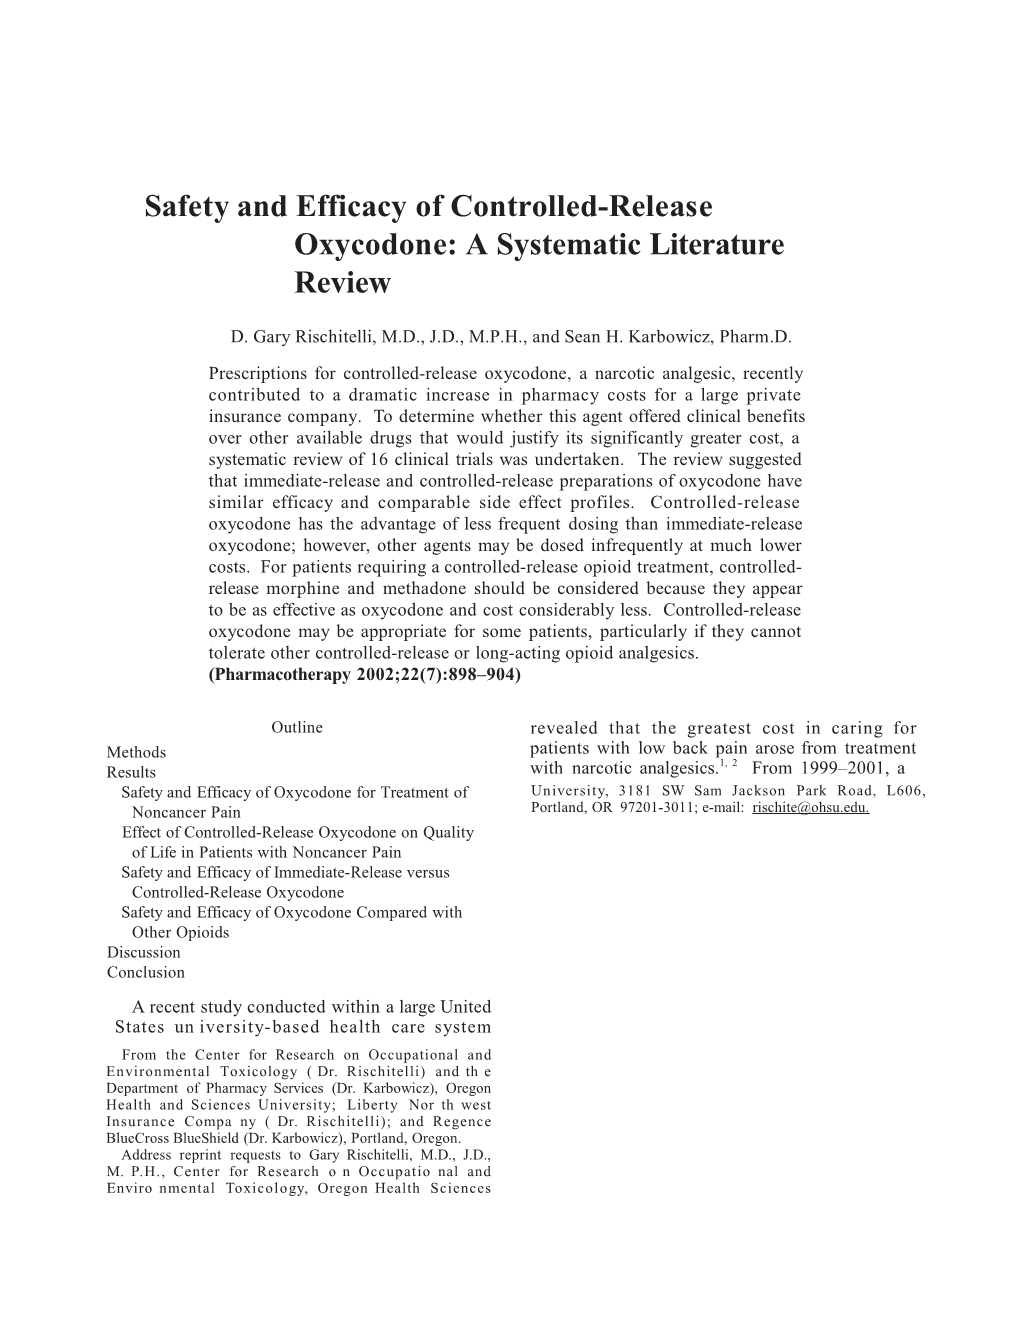 Safety and Efficacy of Controlledrelease Oxycodone: a Systematic Literature Review